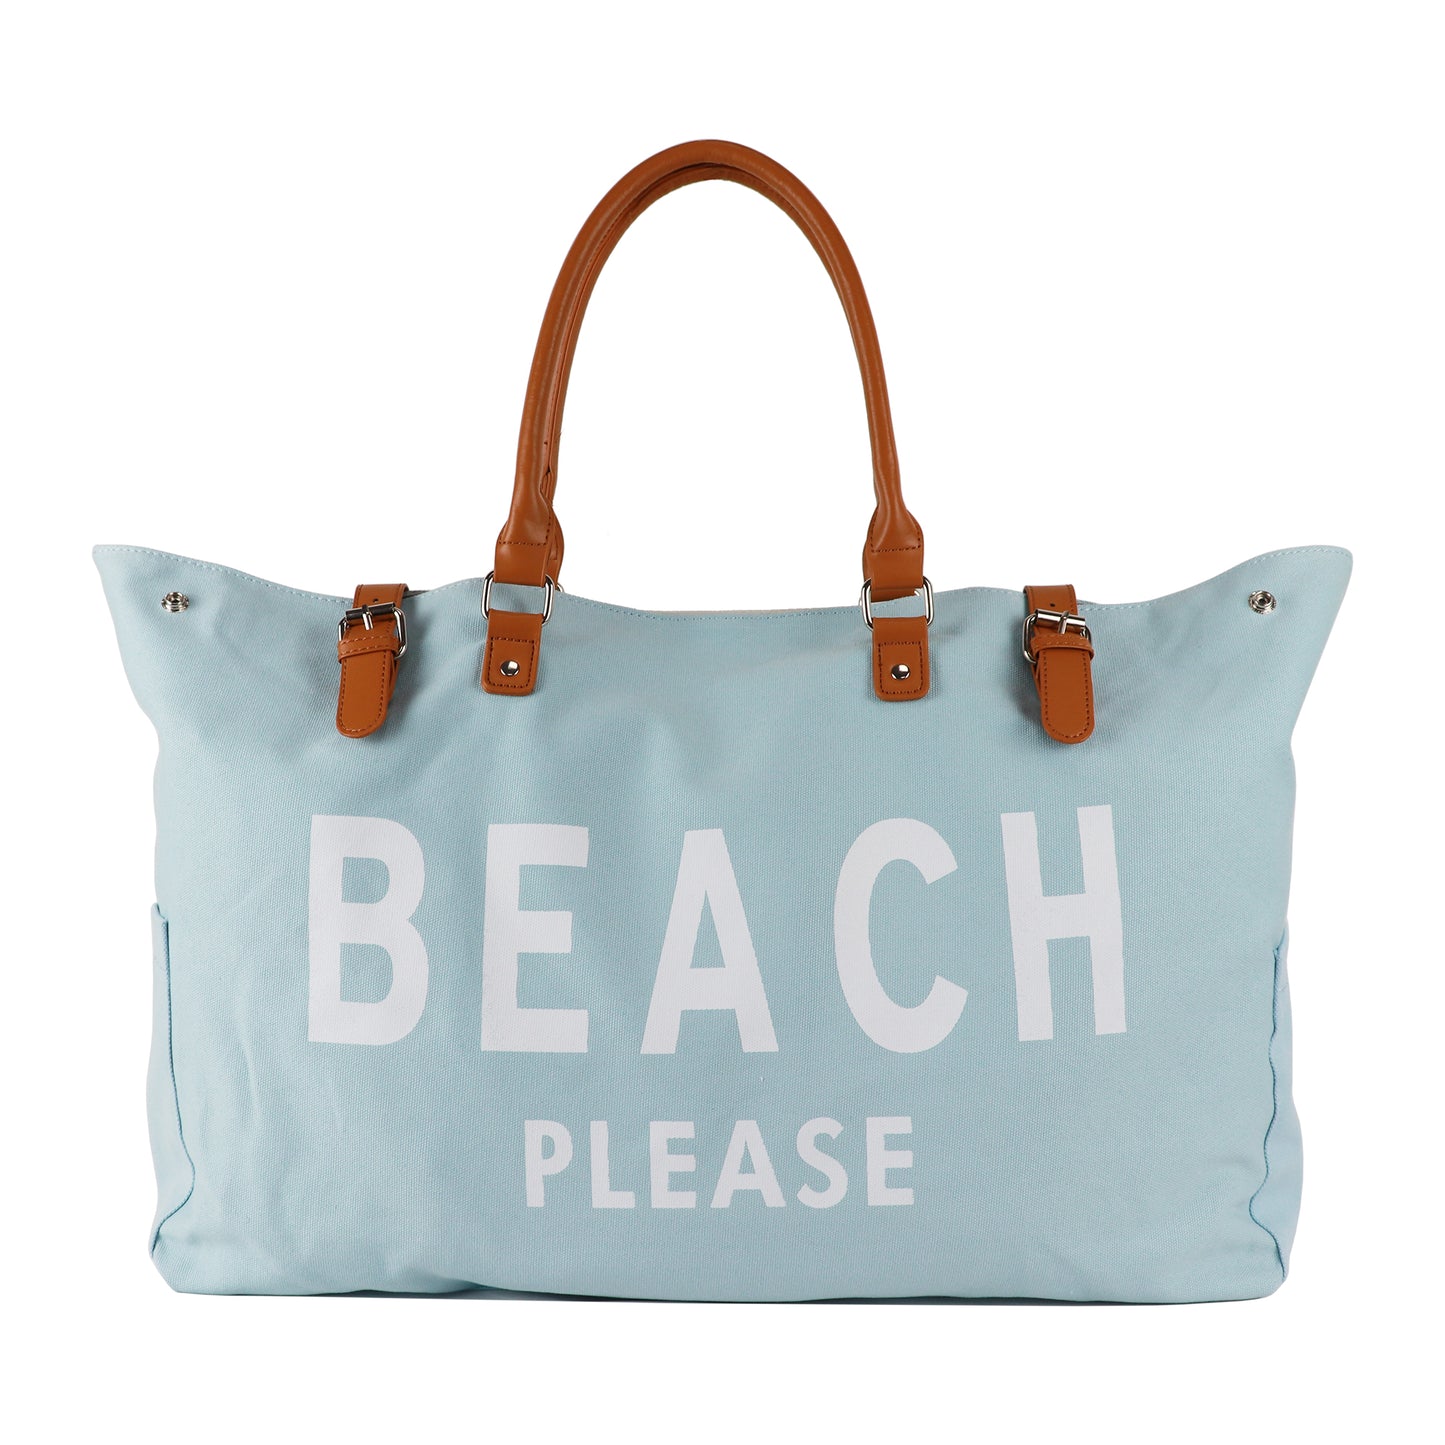 Beach Bag with Leather Handle, Extra Large Beach Bag for Women Waterproof Sandproof, Whatup Beaches Bag